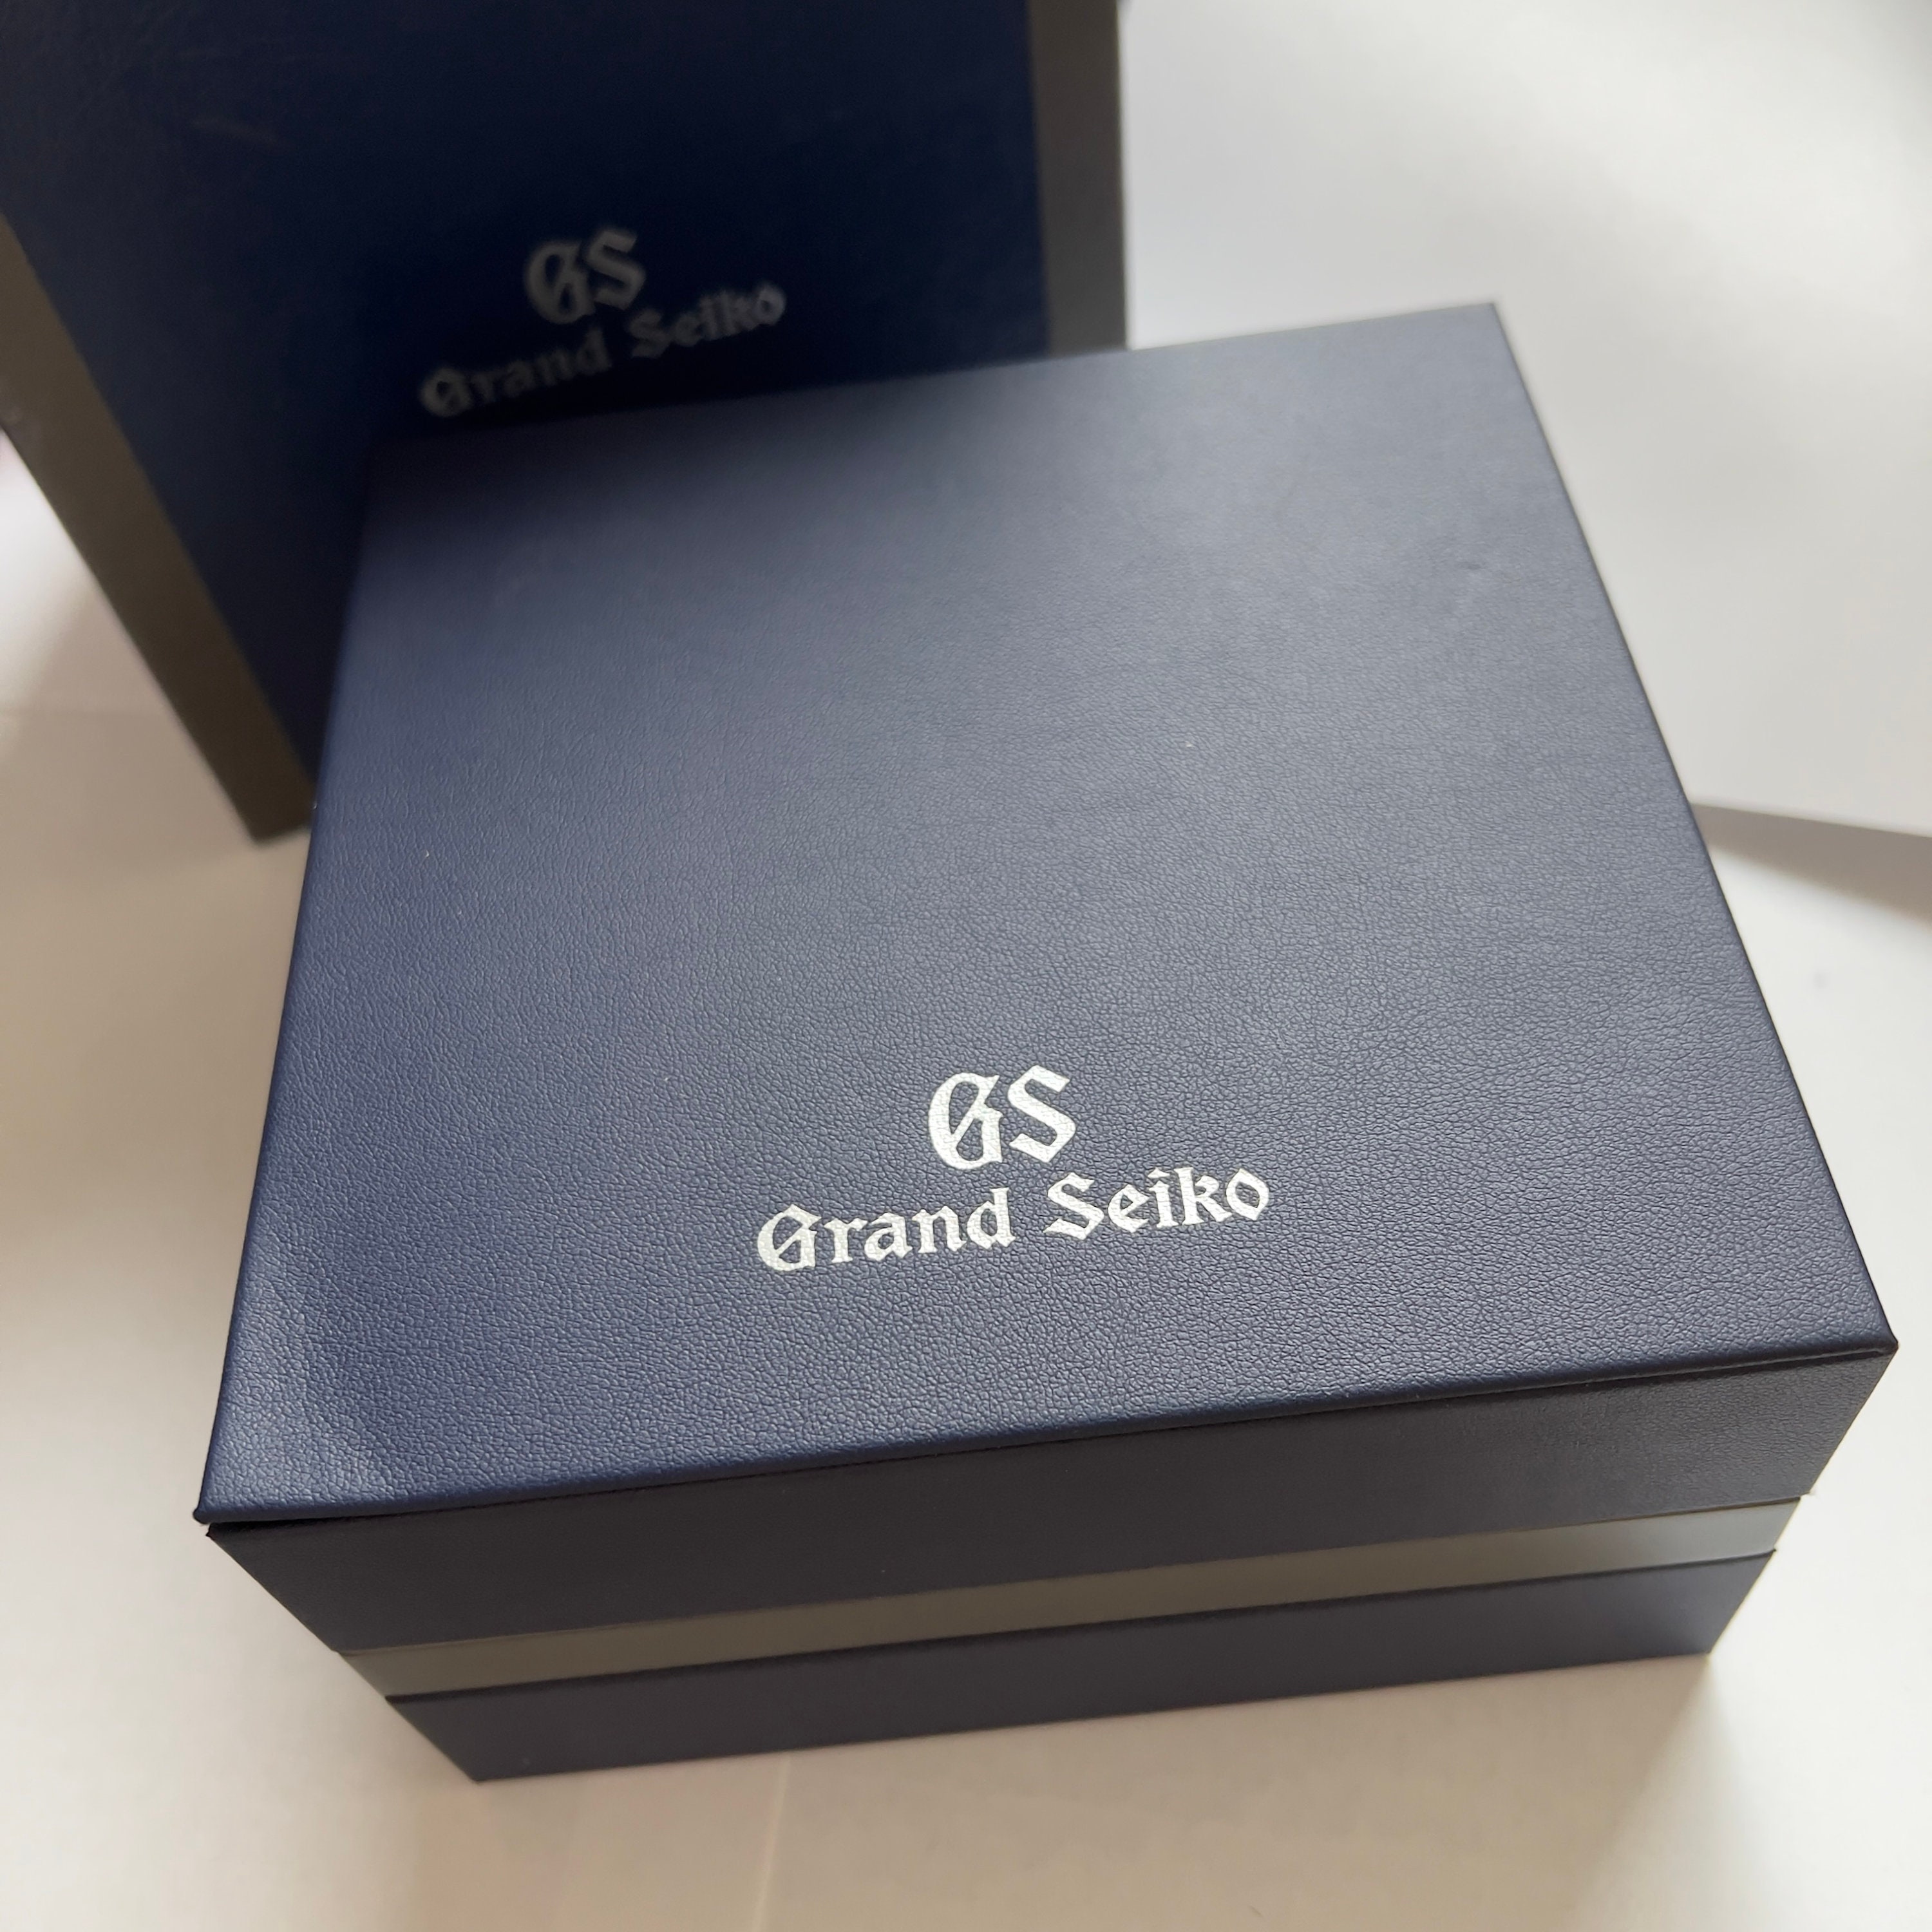 GRAND SEIKO Watch Box Outer Box Booklet .25 - Etsy